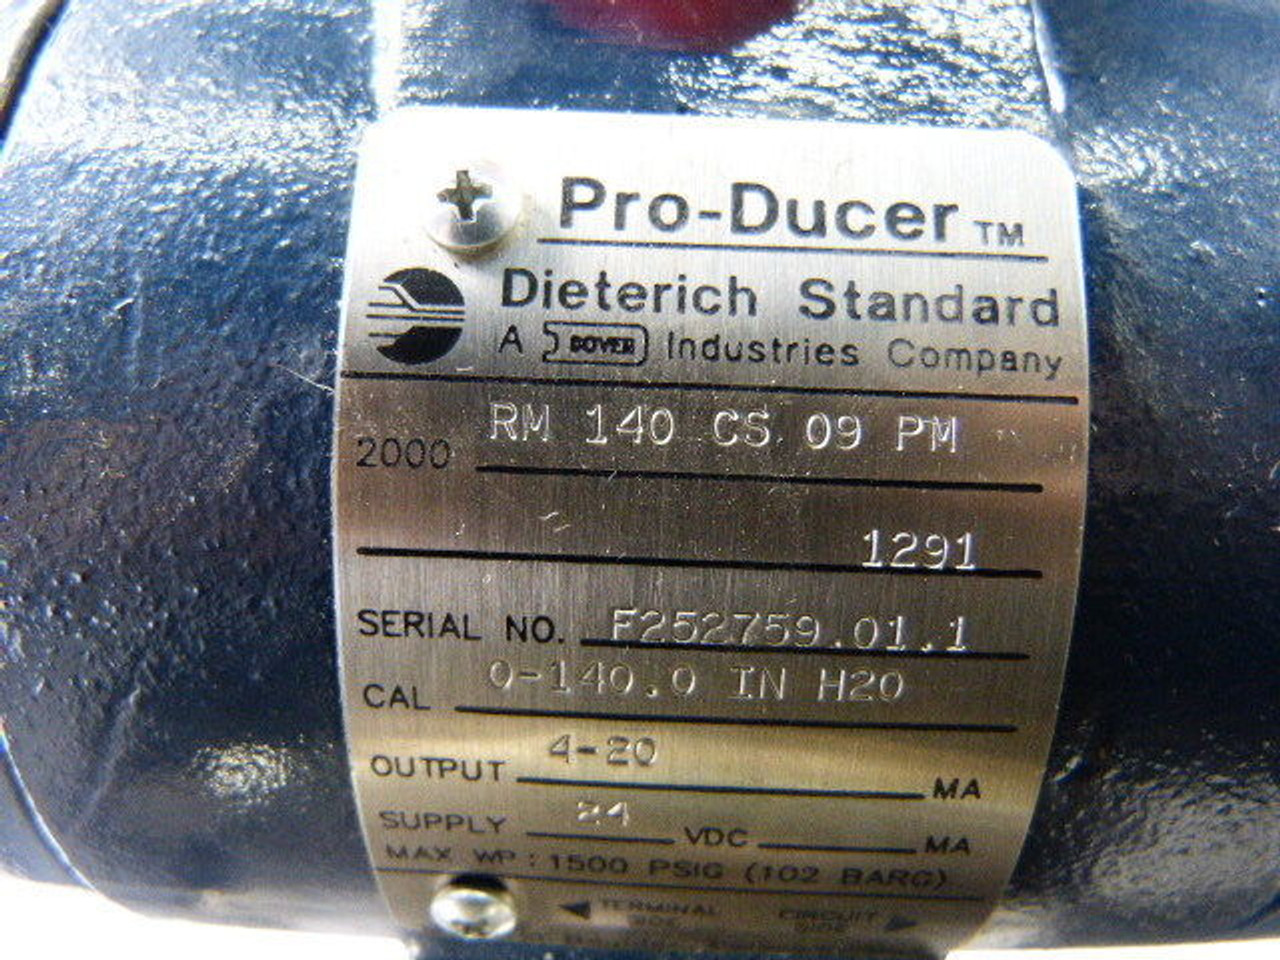 Dieterich 2000-RM-140-CS-09-PM Pro-Ducer Flow Transducer 24VDC 0-140.0 Cal USED